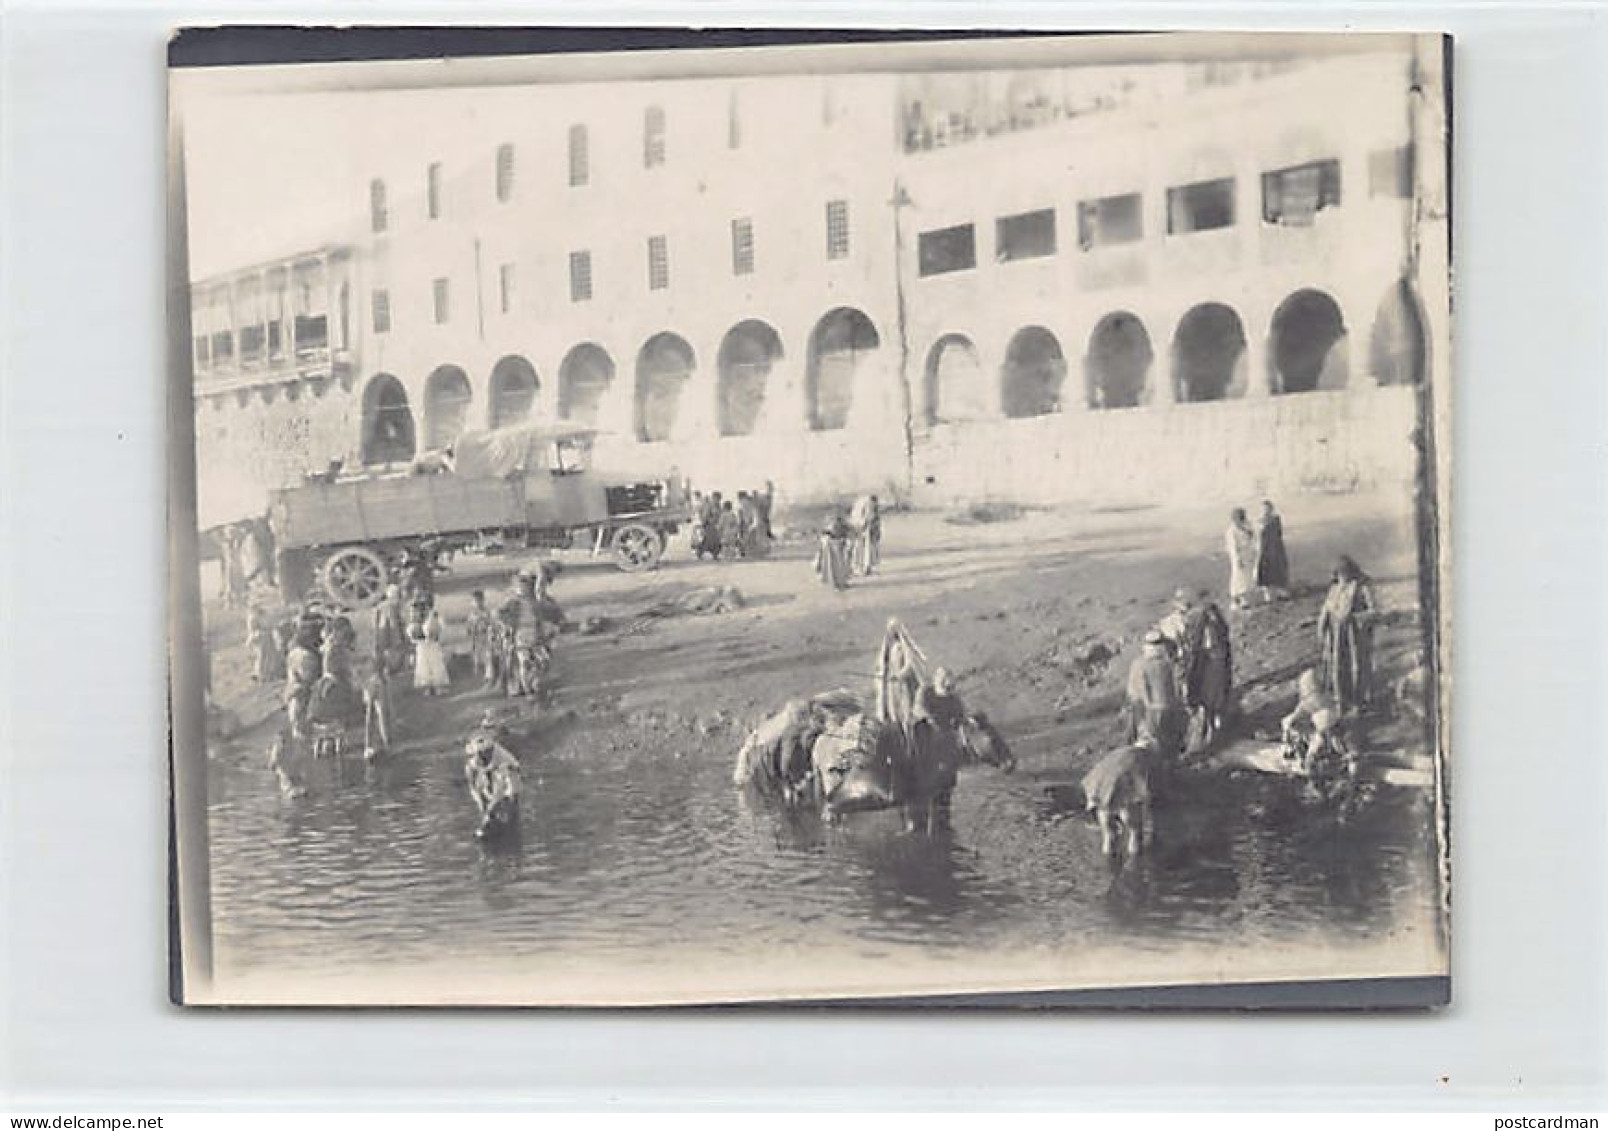 Iraq - BAGHDAD Or MOSUL ? - The Banks Of The Tigris River - PHOTO From An Album Of A German Soldier Attached To The Tirk - Iraq